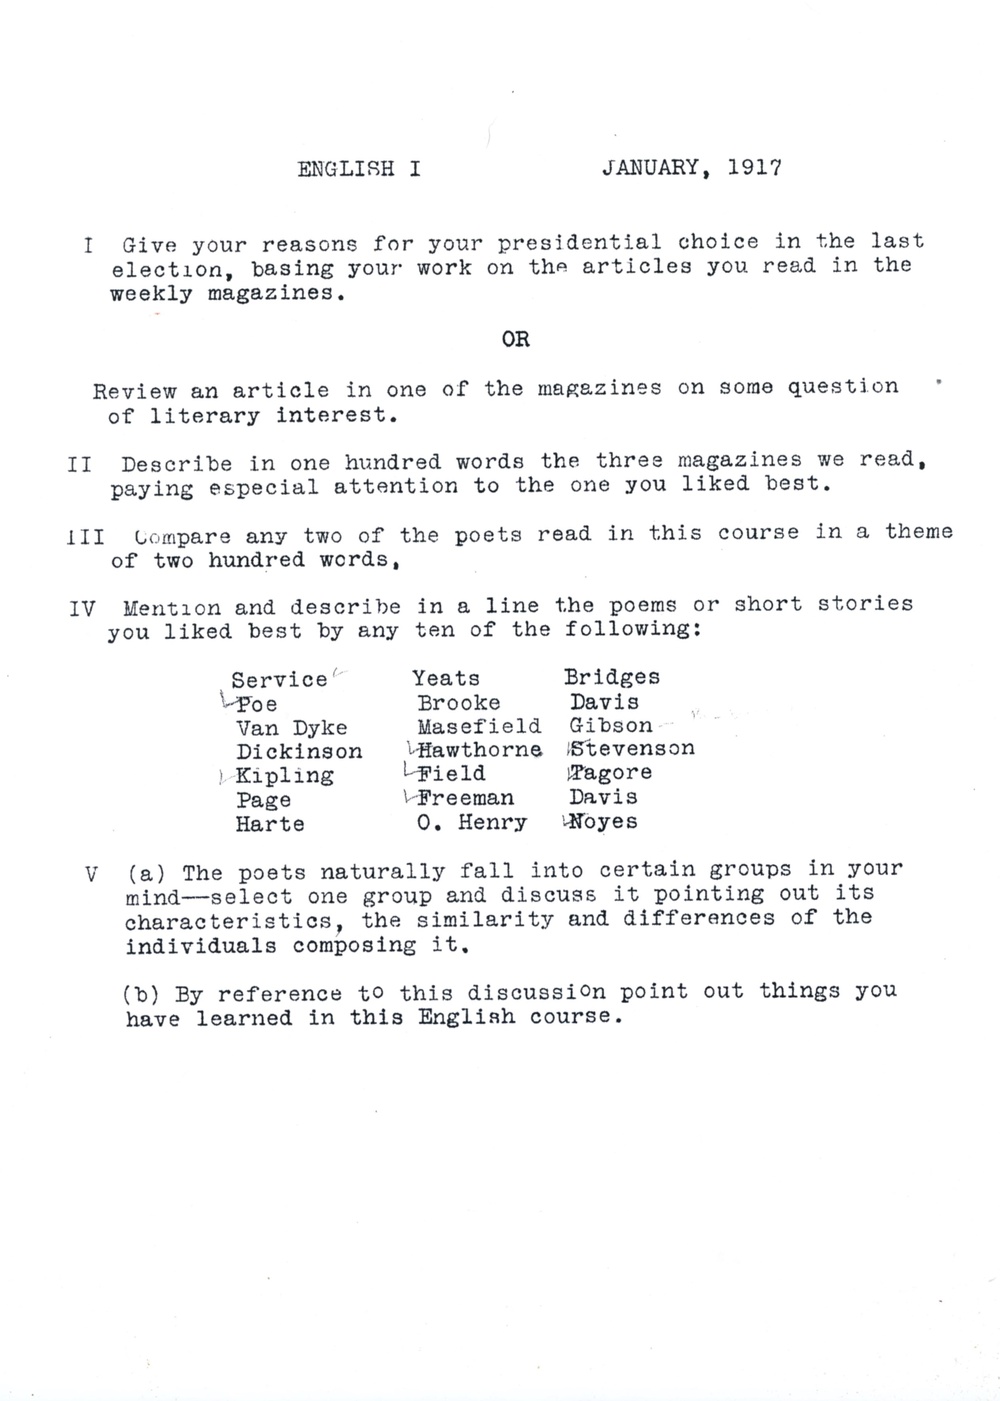 A document bears the title “ENGLISH I” and the date “JANUARY, 1917” followed by five writing prompts printed in a typewritten font.